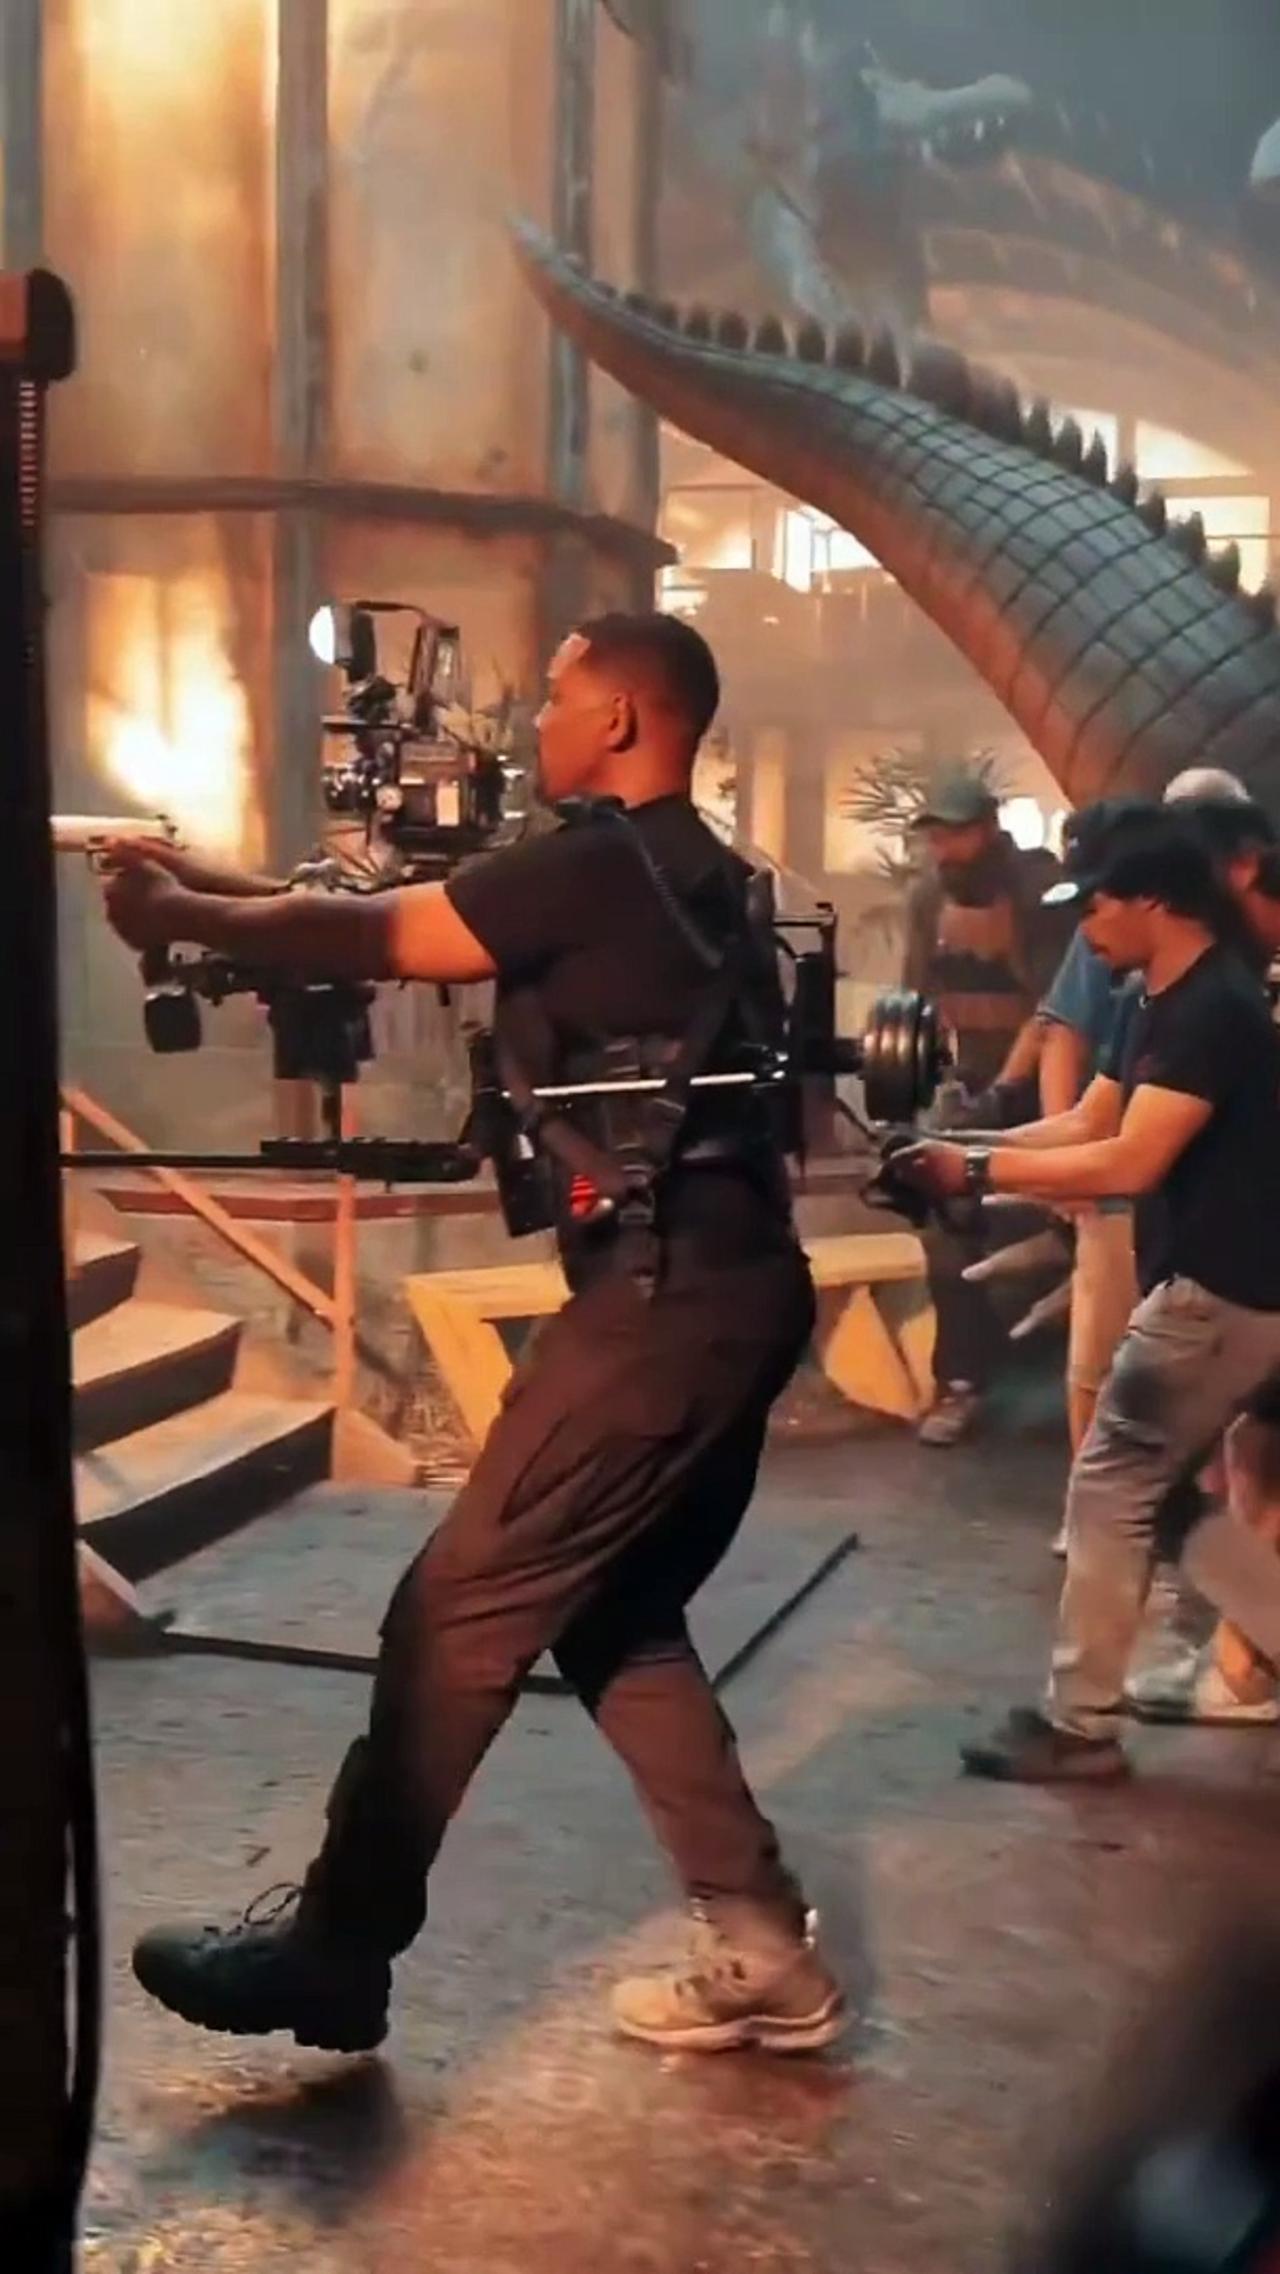 Watch Will Smith Perform an Insane Action Scene for Bad Boys: Ride or Die